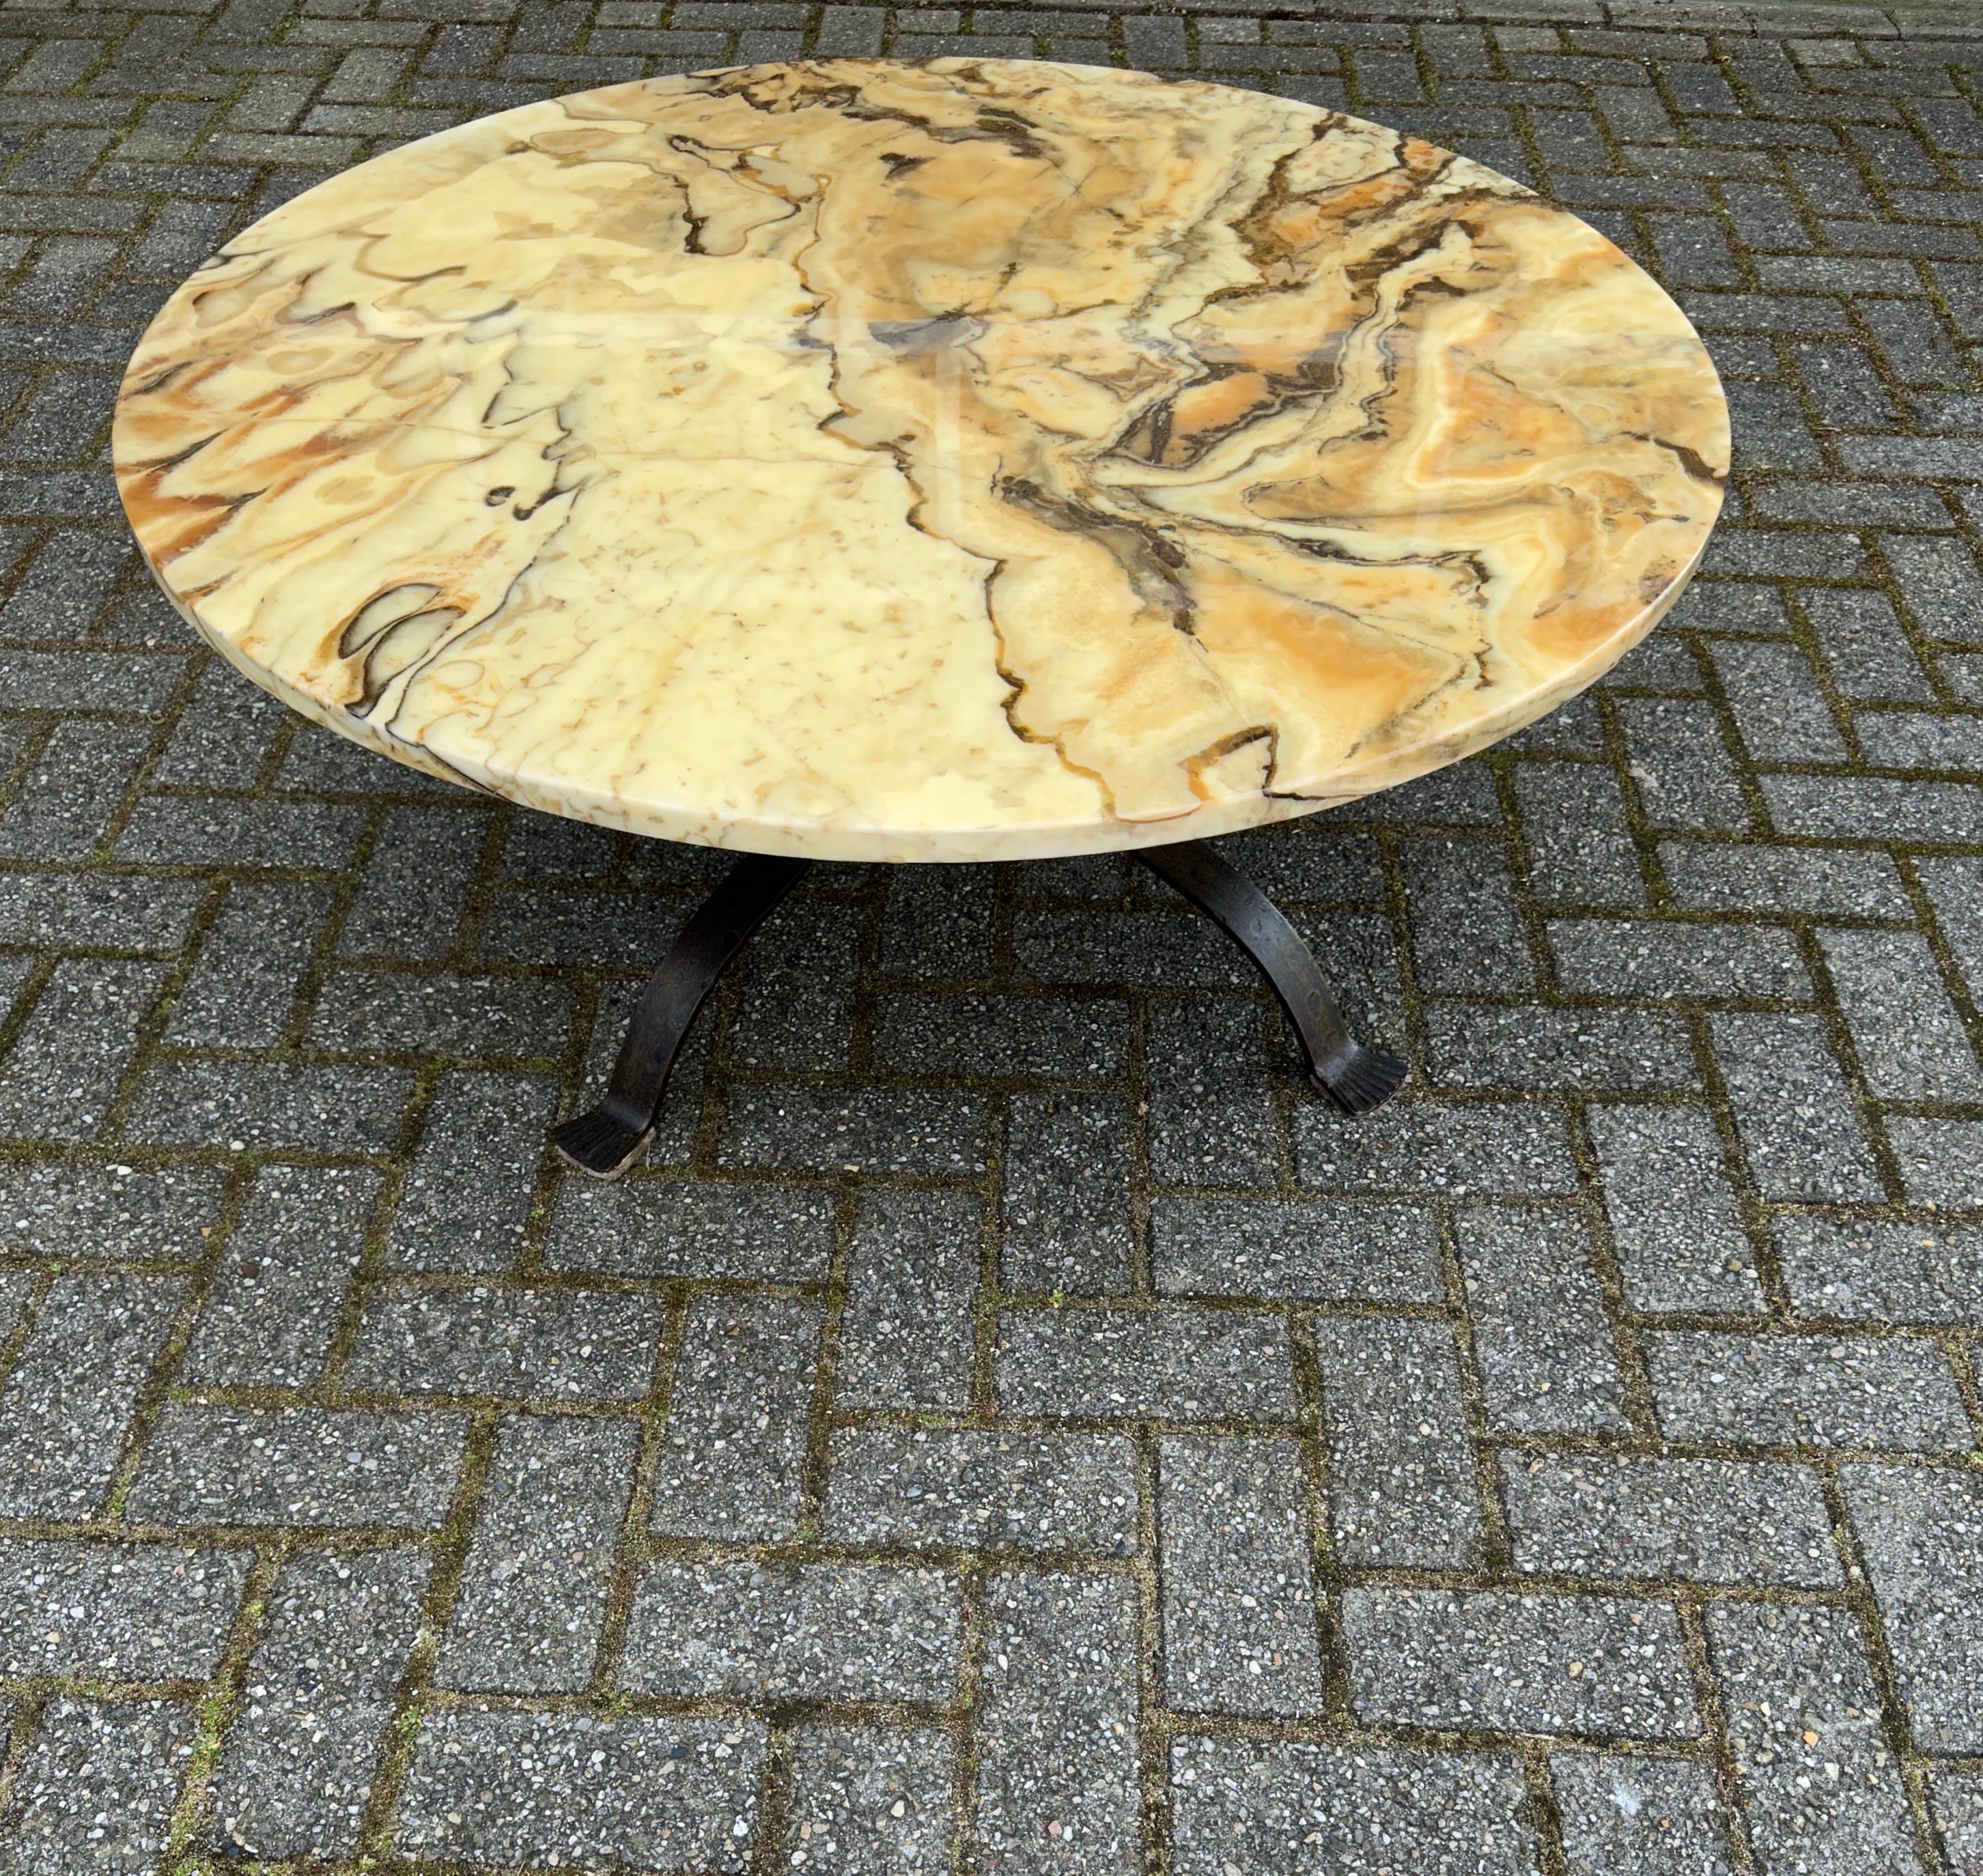 Great size, practical and very decorative round table.

This beautiful quality coffee or large size end table is made of natural materials only and you could not wish for a more durable specimen. The hand forged, wrought iron base is perfect for